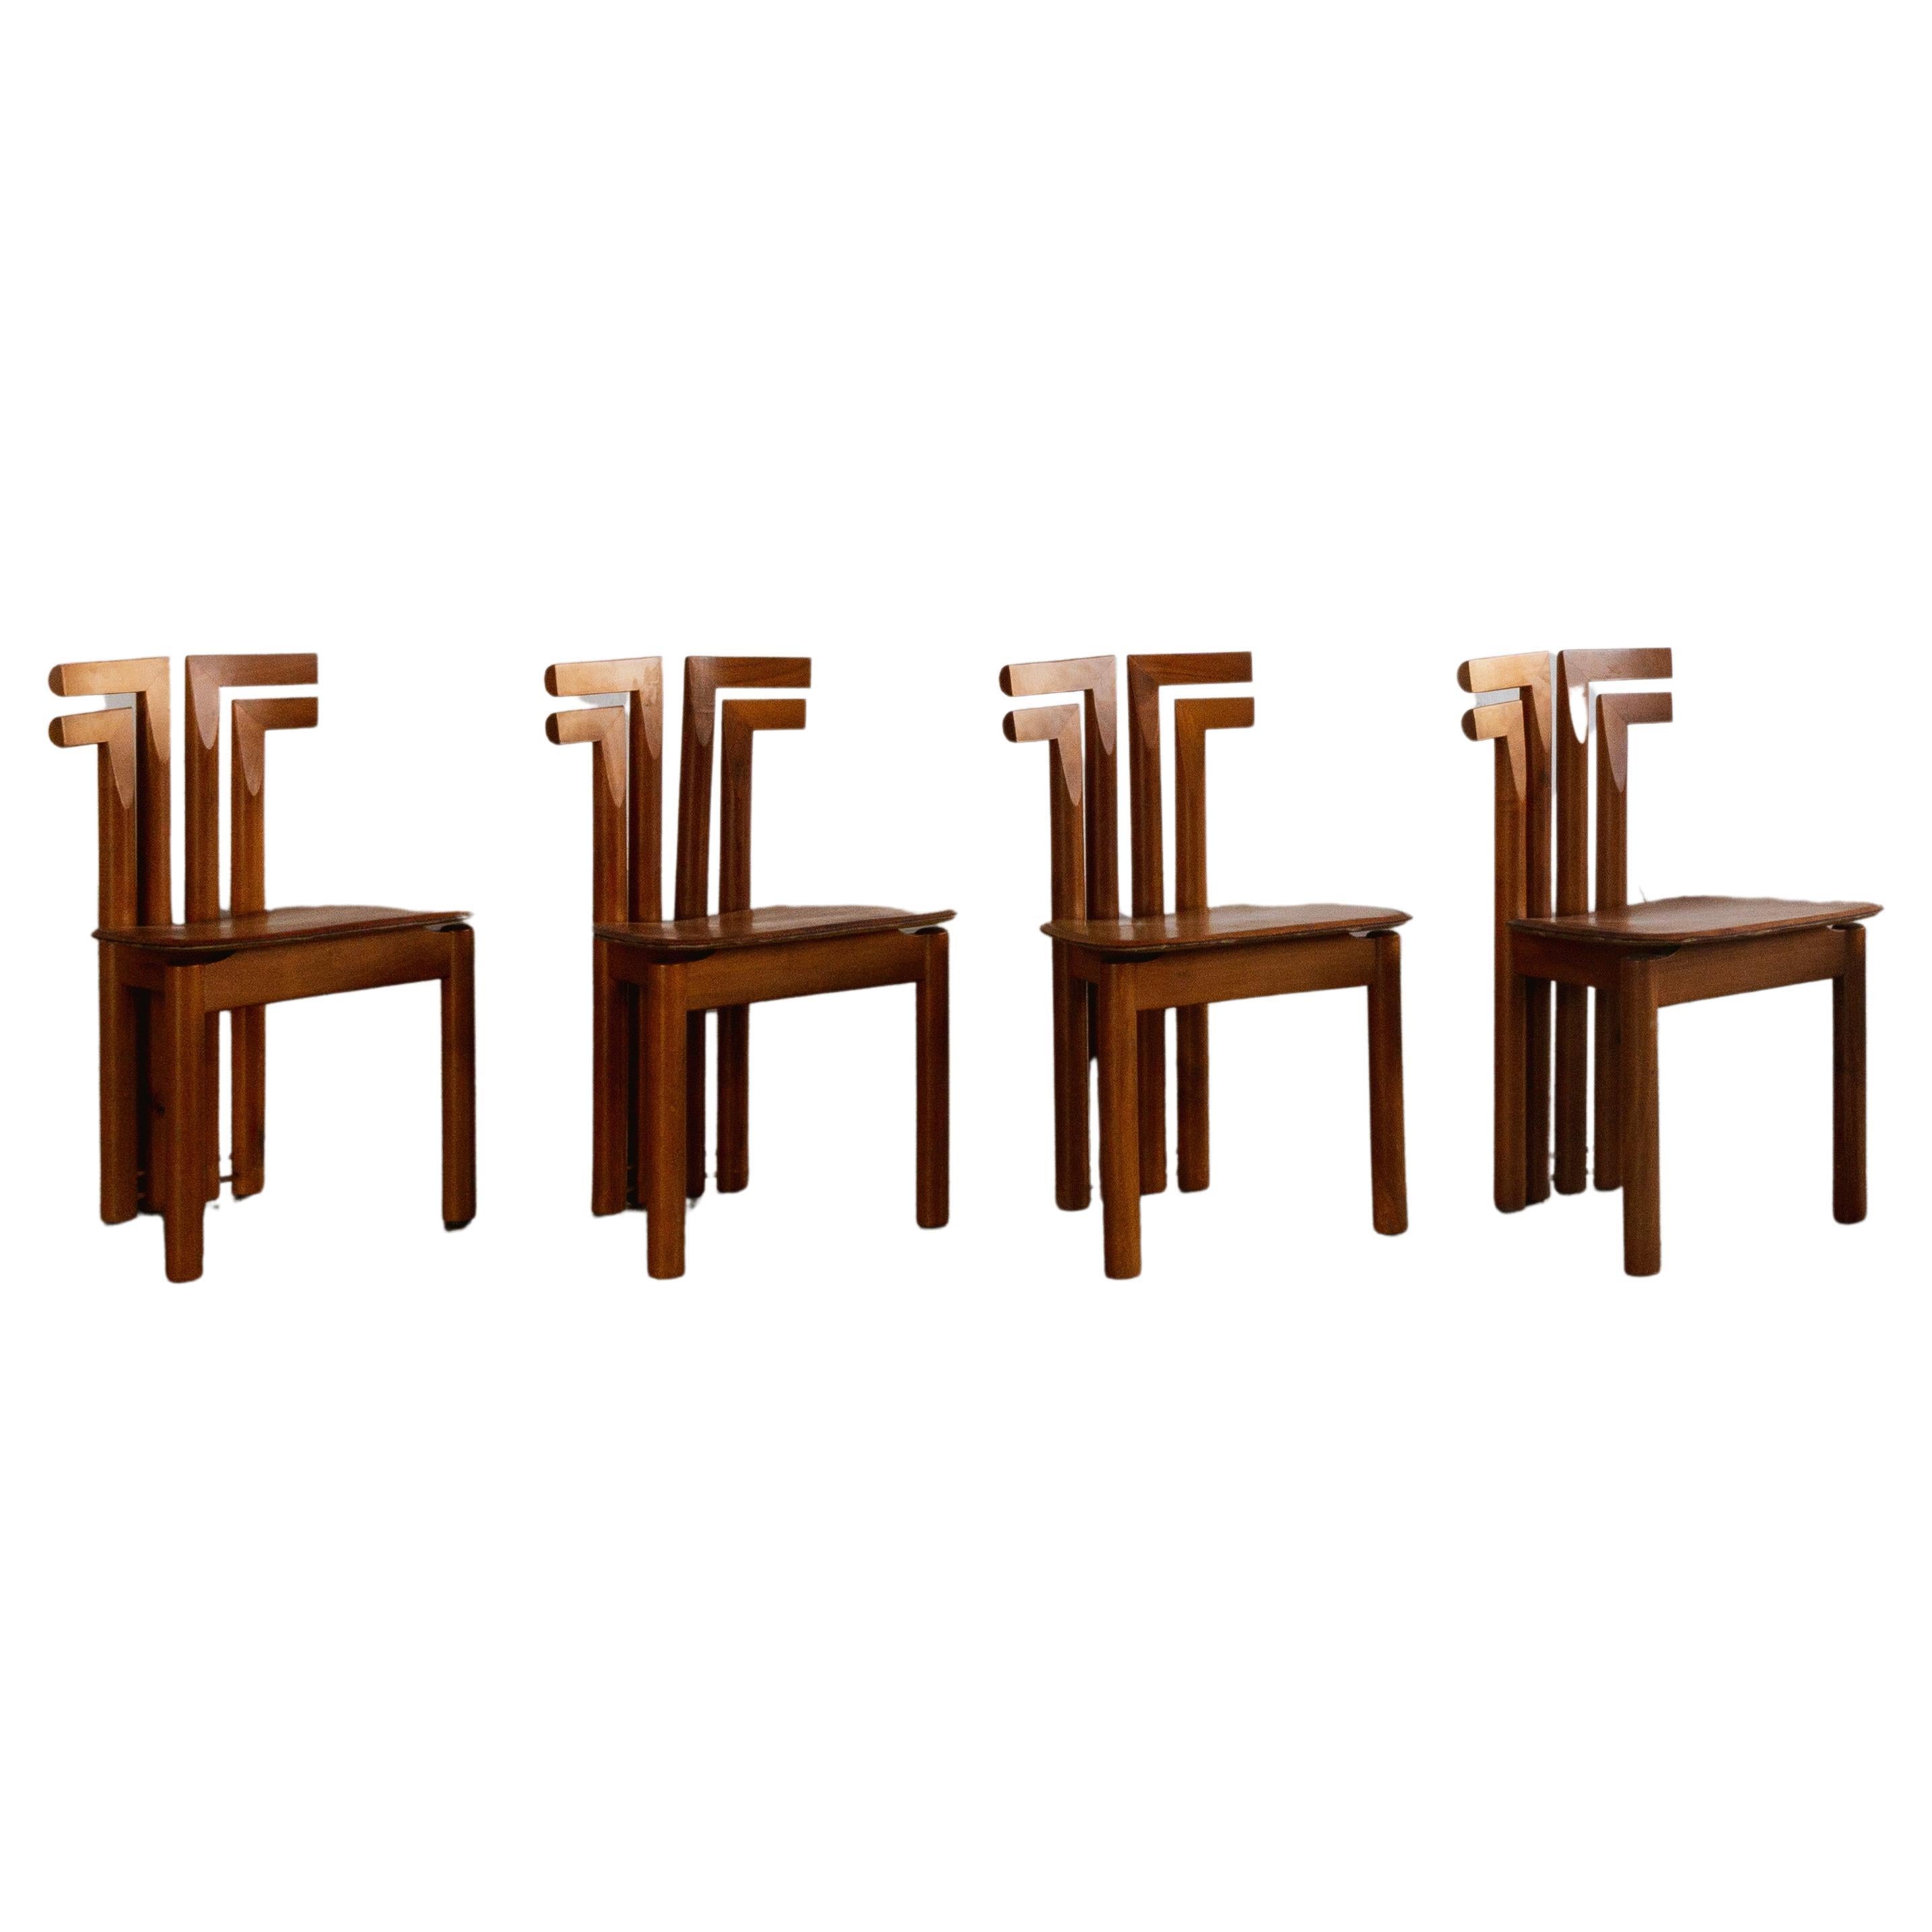 Mario Marenco “Sapporo” Dining Chairs for Mobil Girgi, 1970, set of 4 For Sale